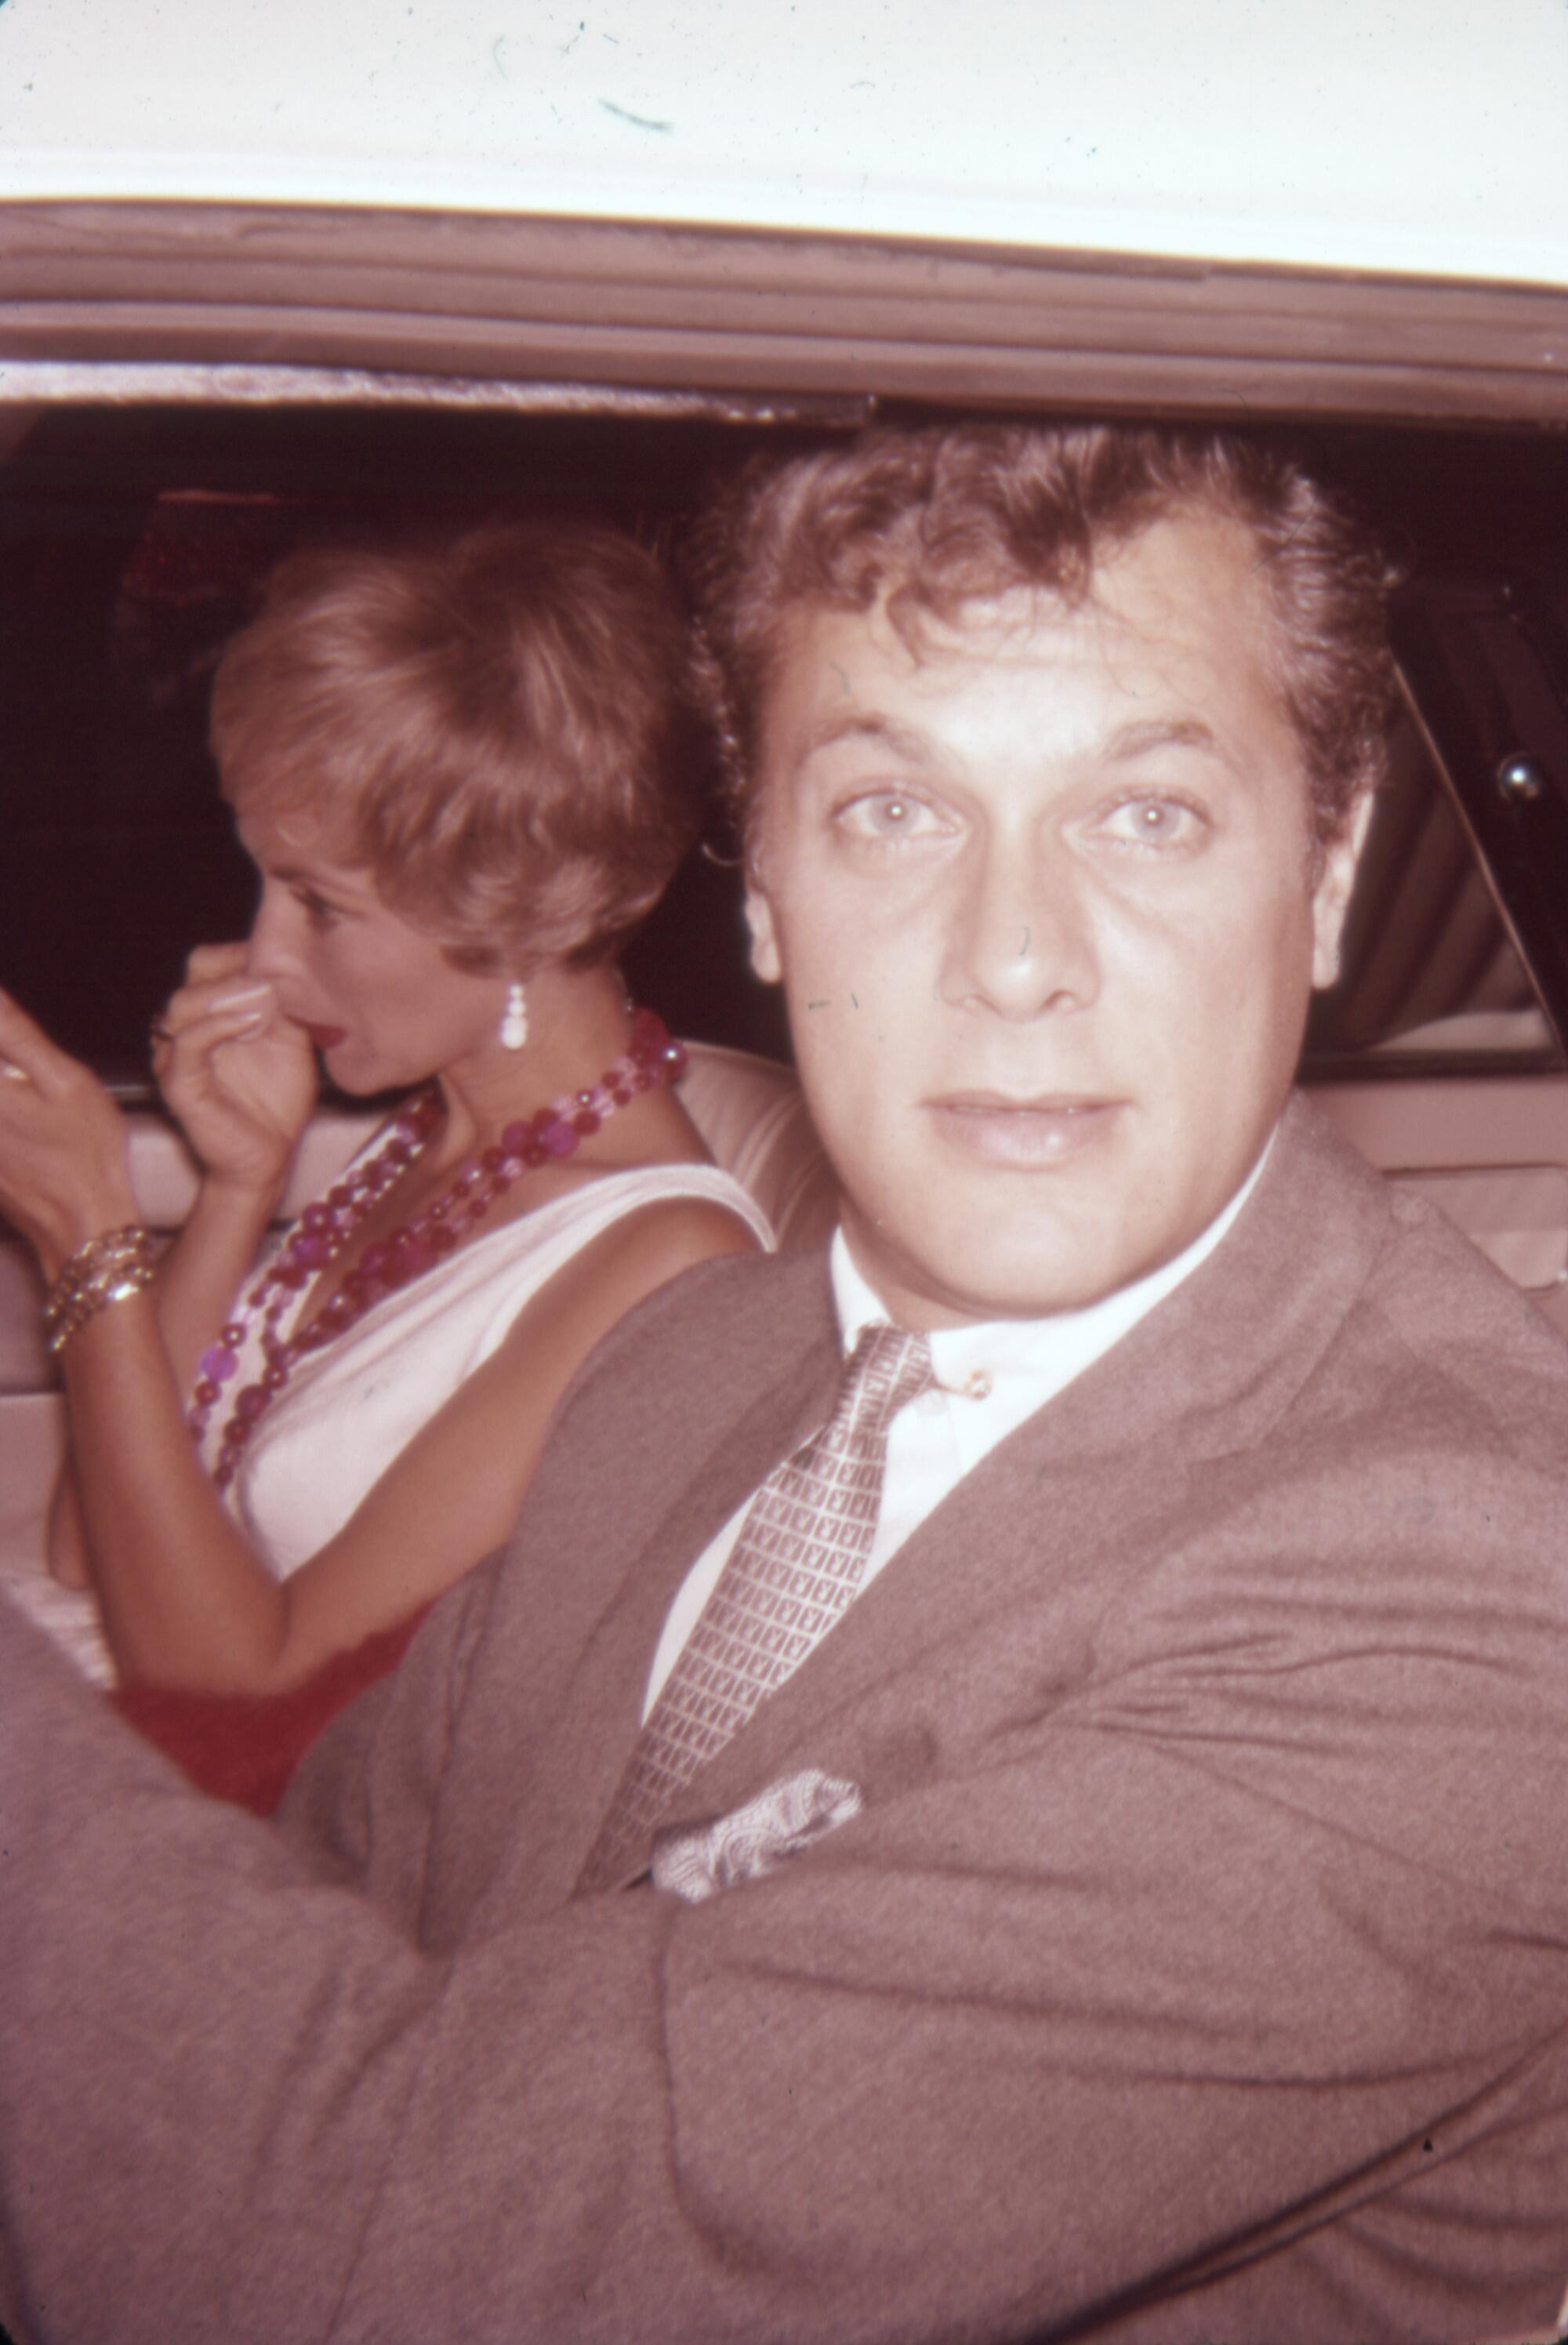 A well-dressed man and woman seated in a car.